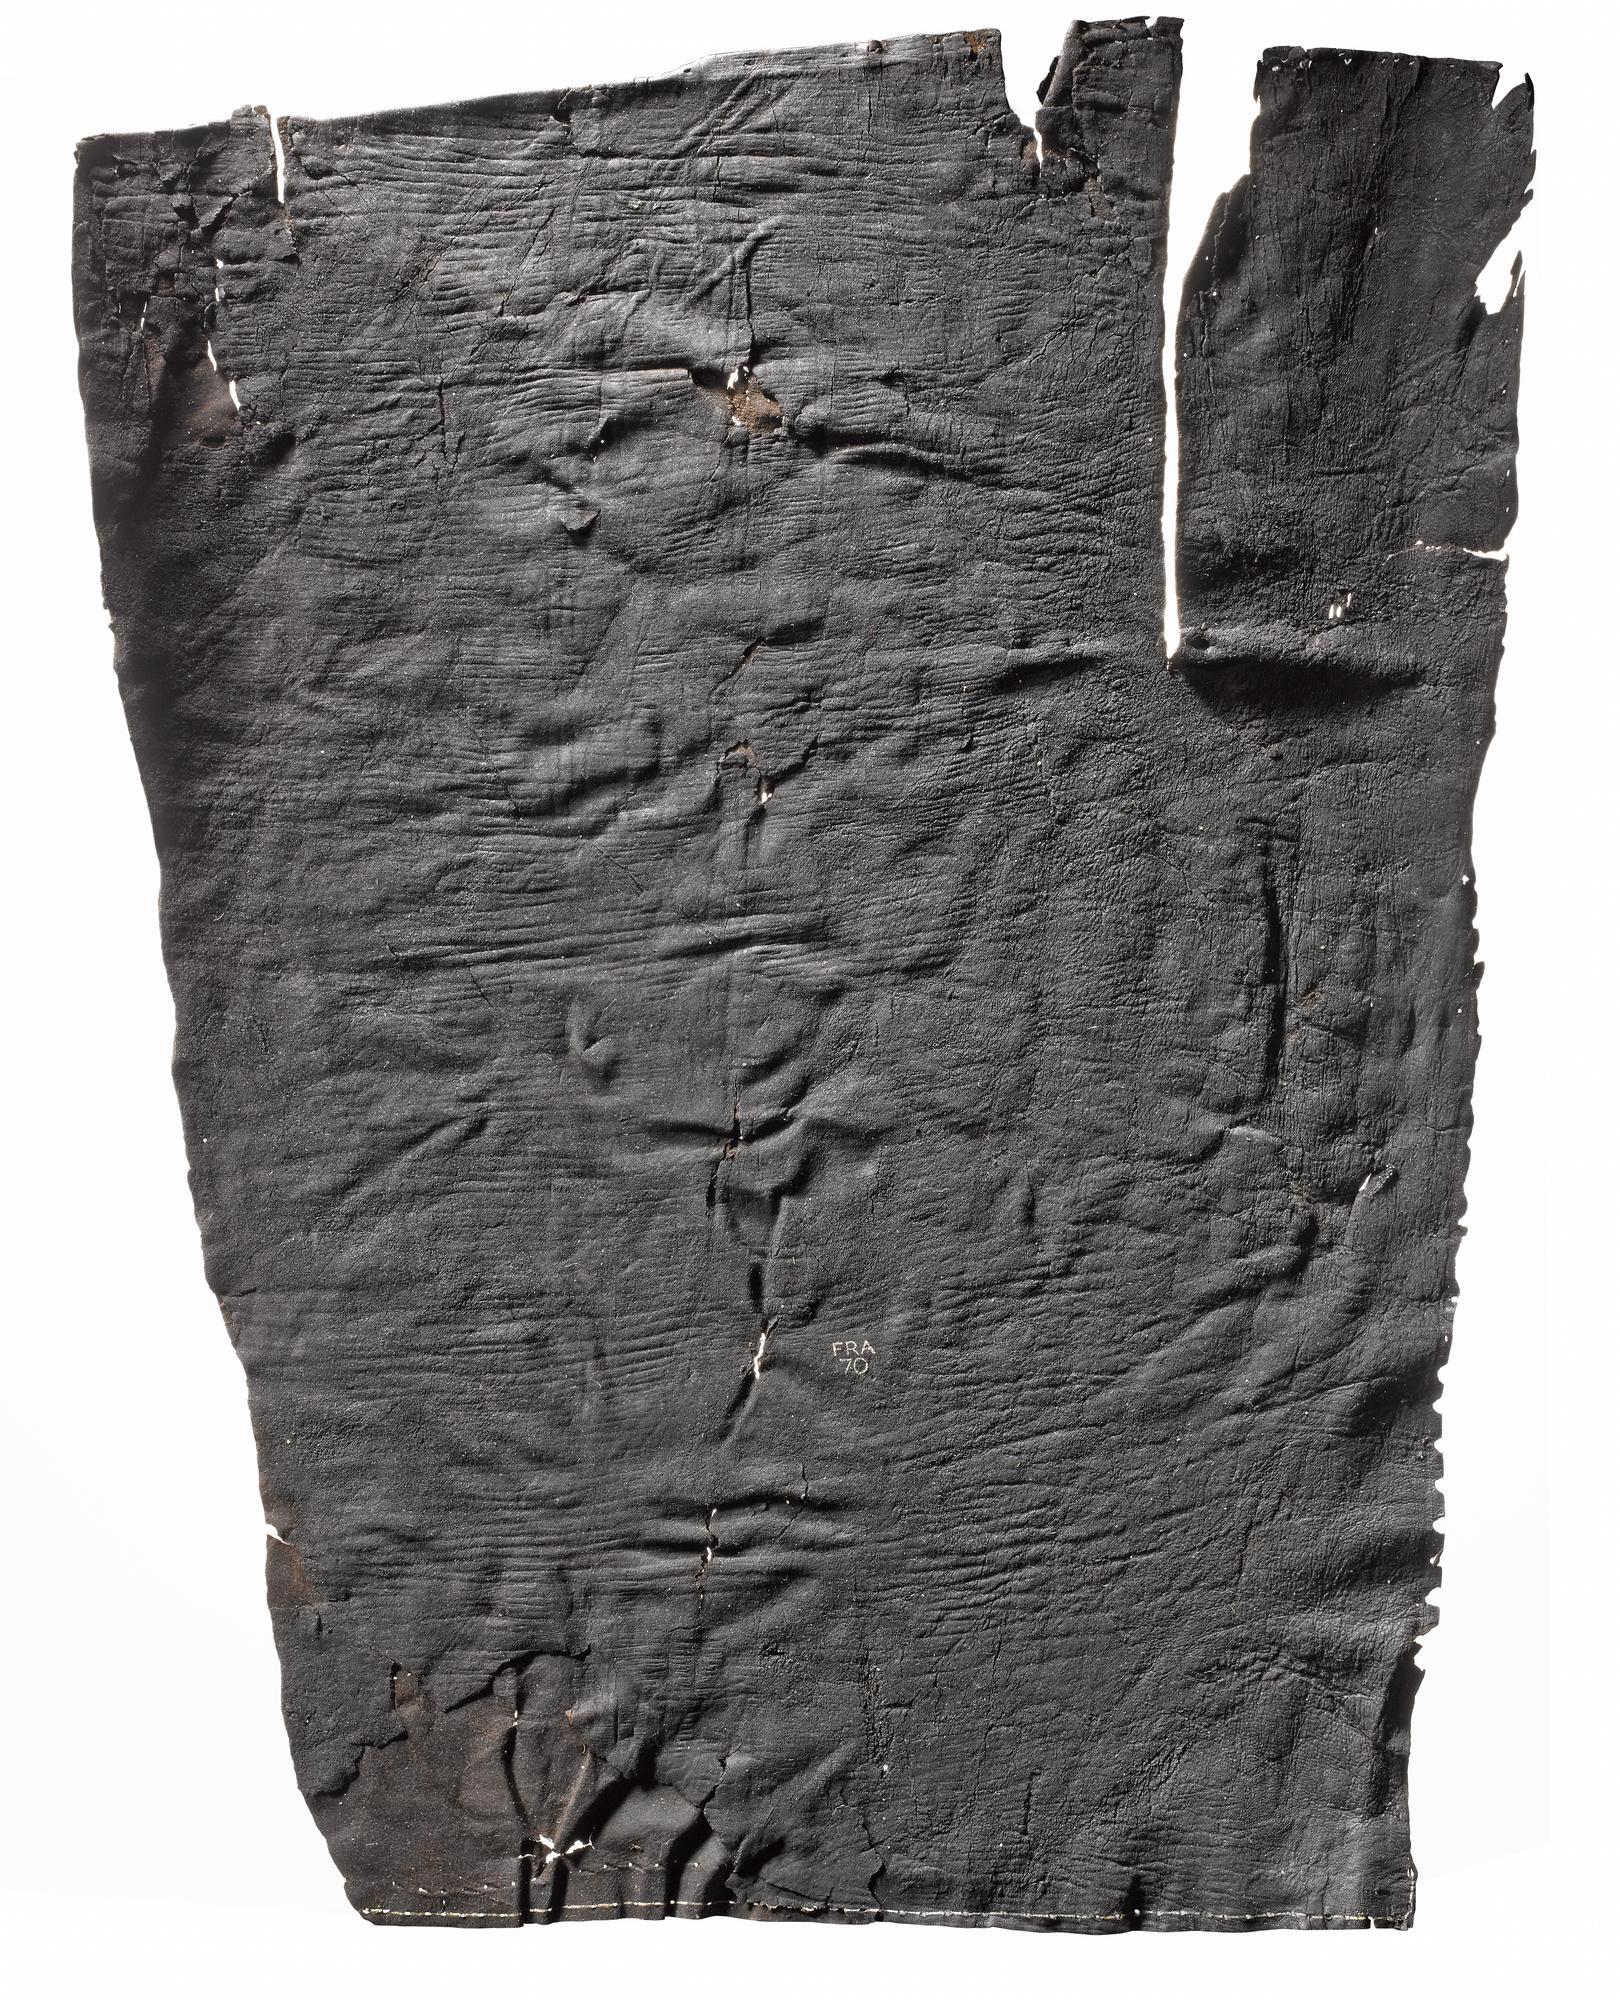 Image of Tent panel of leather, oblong with stitch marks, from the Roman site at Newstead, Roxburghshire, Scotland, 80 - 180 AD © National Museums Scotland